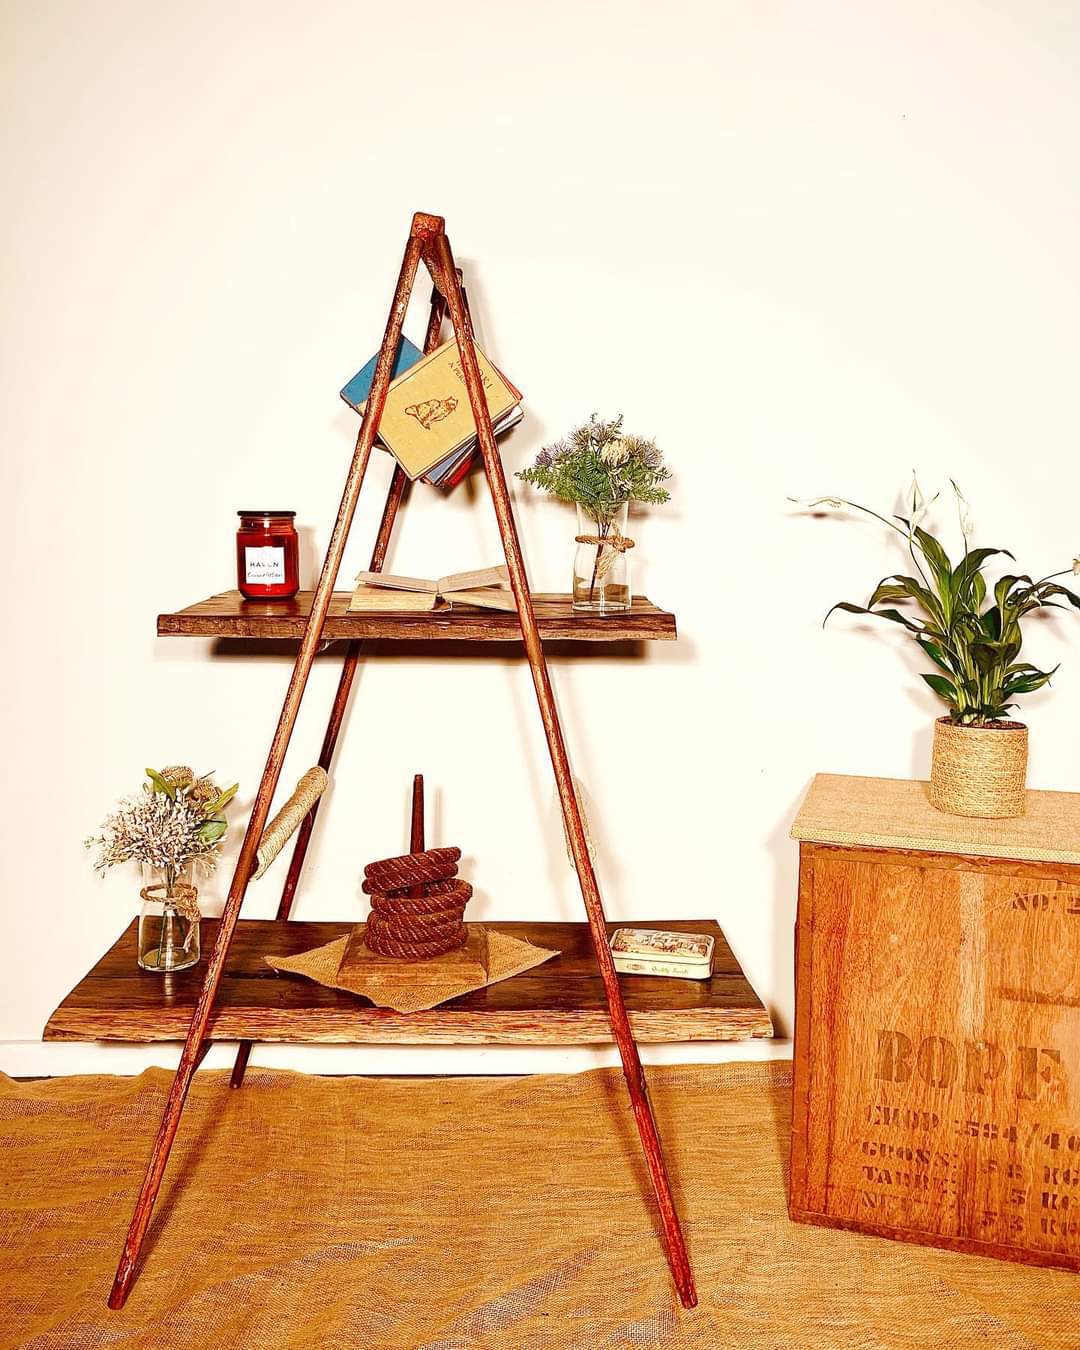 Reclaimed timber Shelving with vintage apple picking ladder.